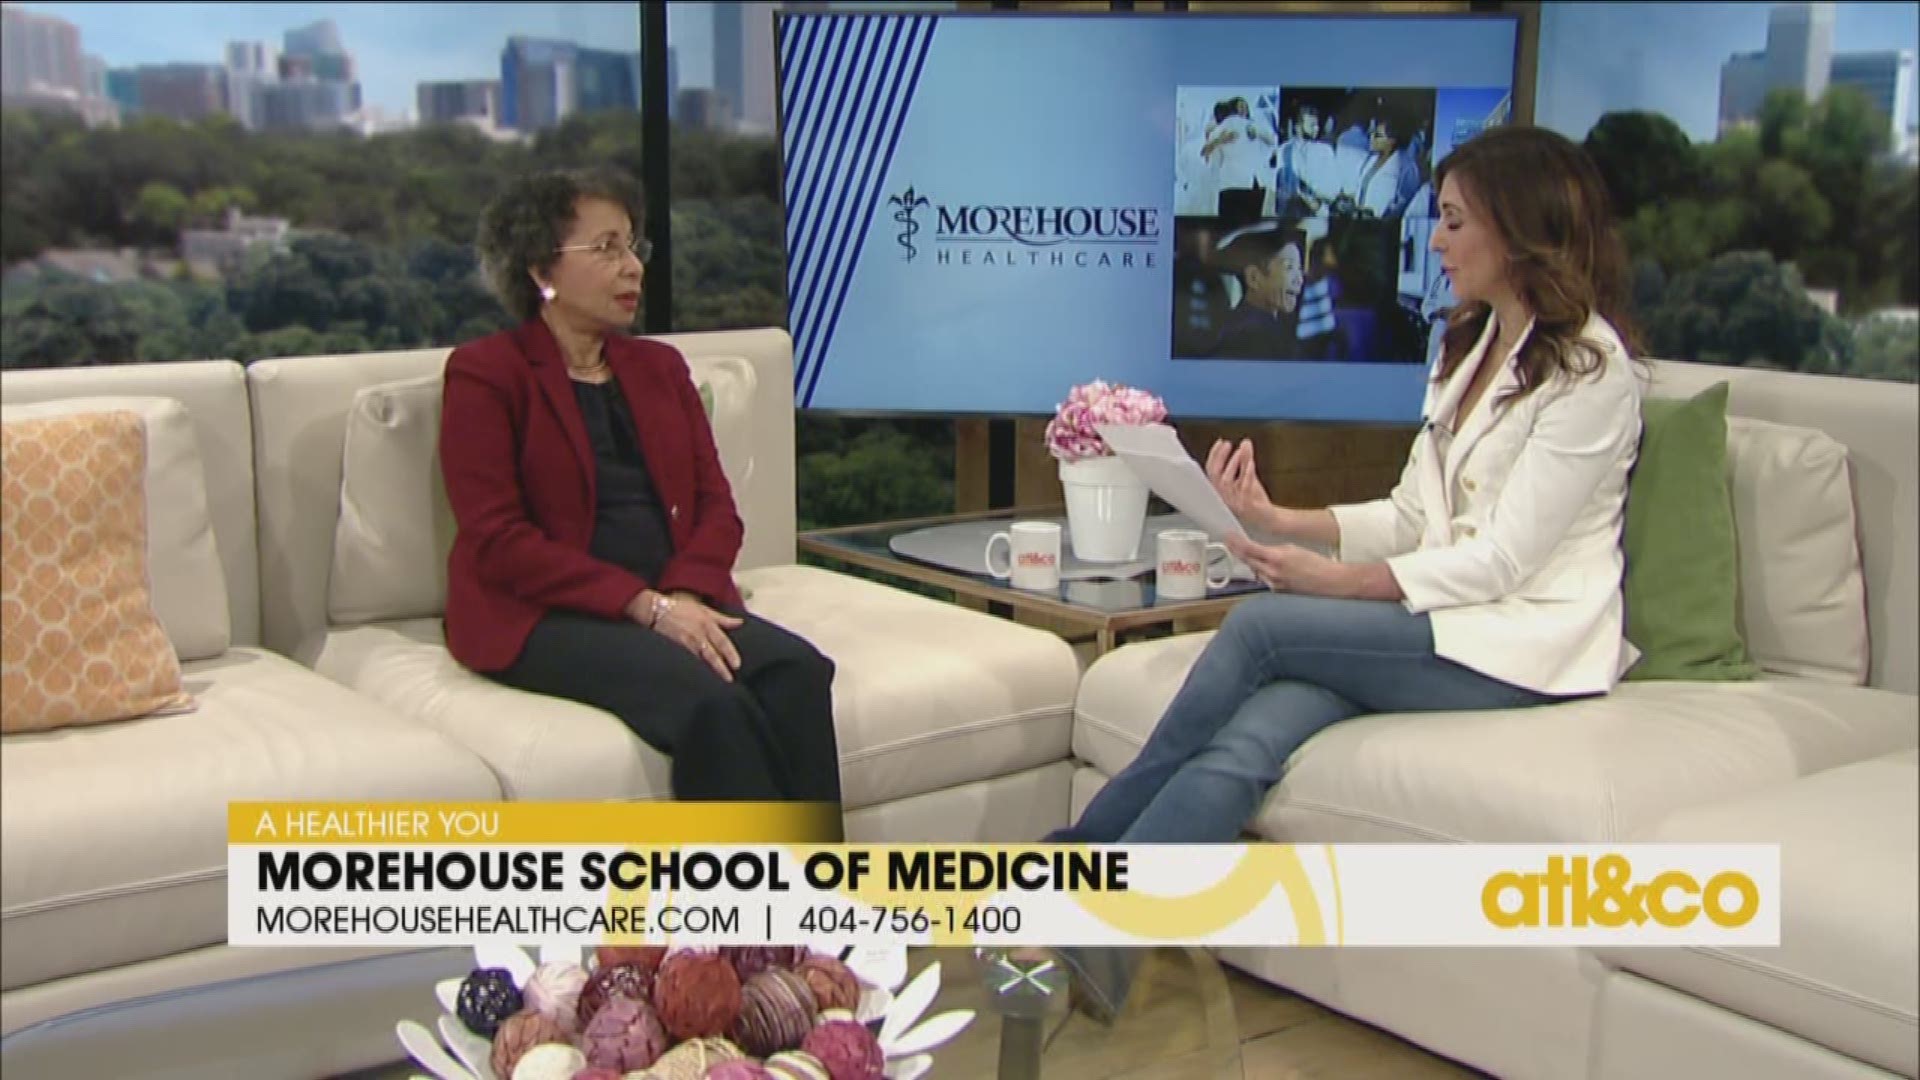 Morehouse School of Medicine previews their lifestyle and cooking classes on 'Atlanta & Company'